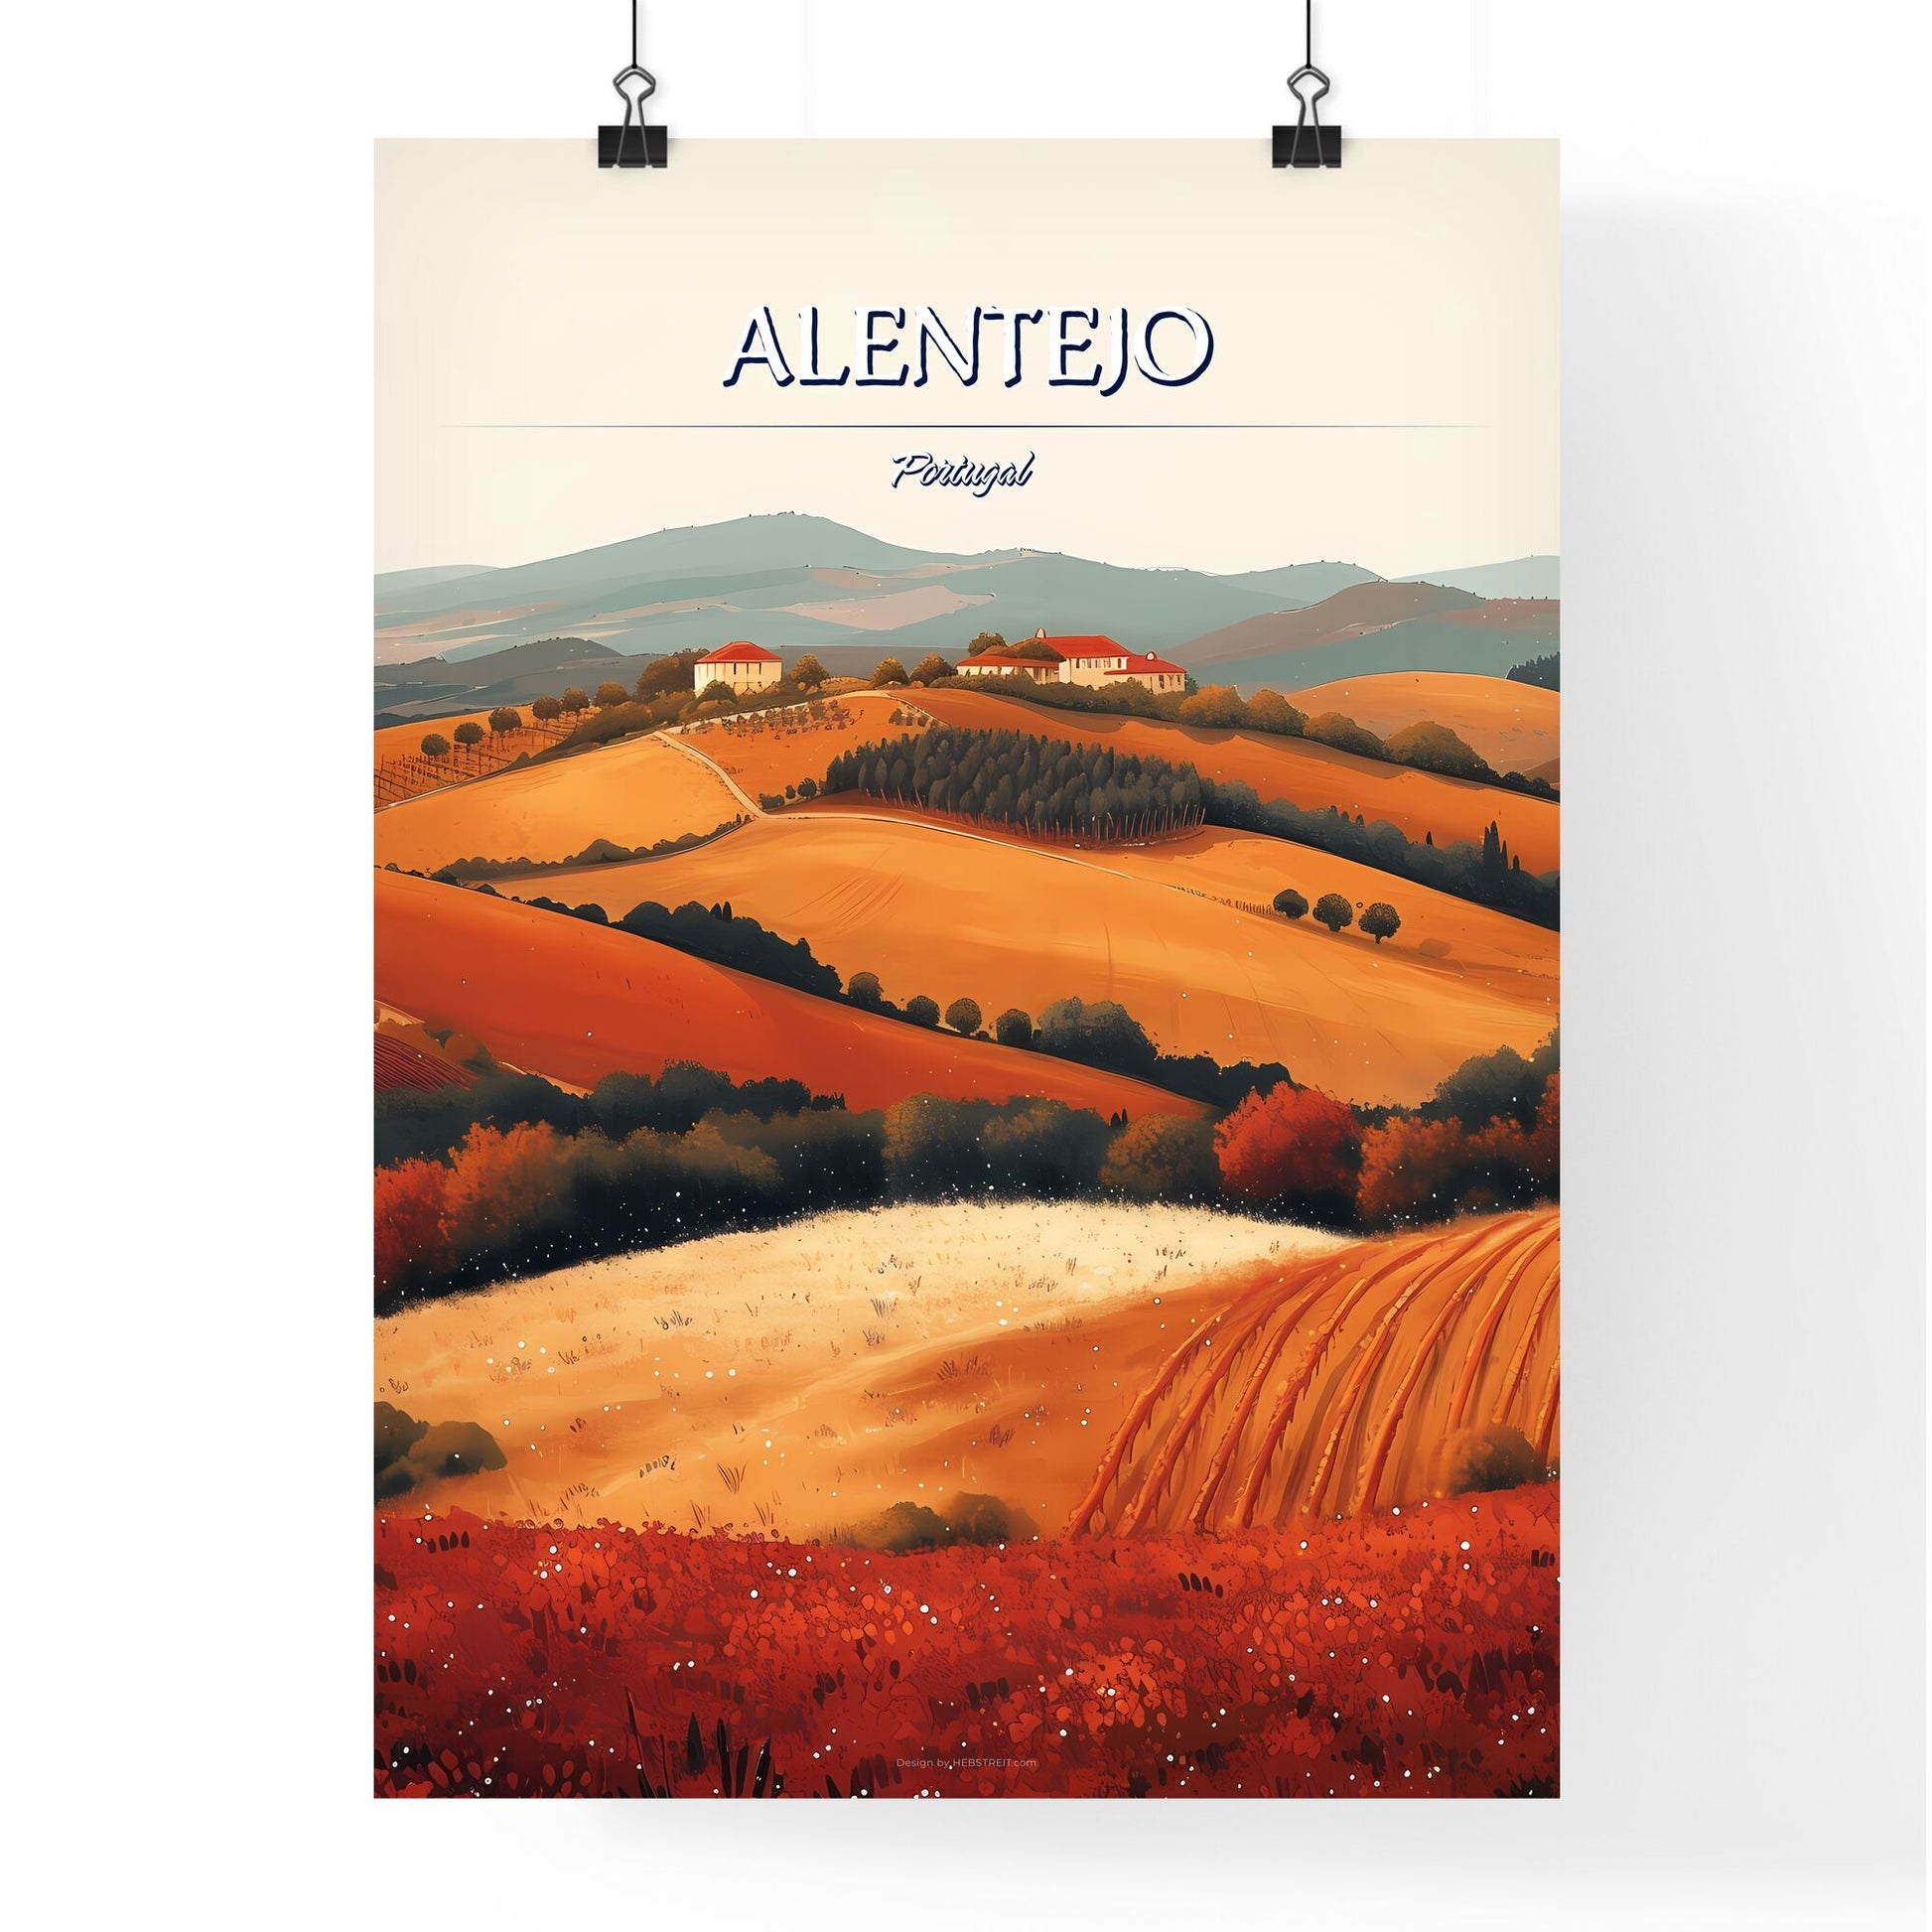 Alentejo, Portugal - Art print of a landscape with hills and trees Default Title